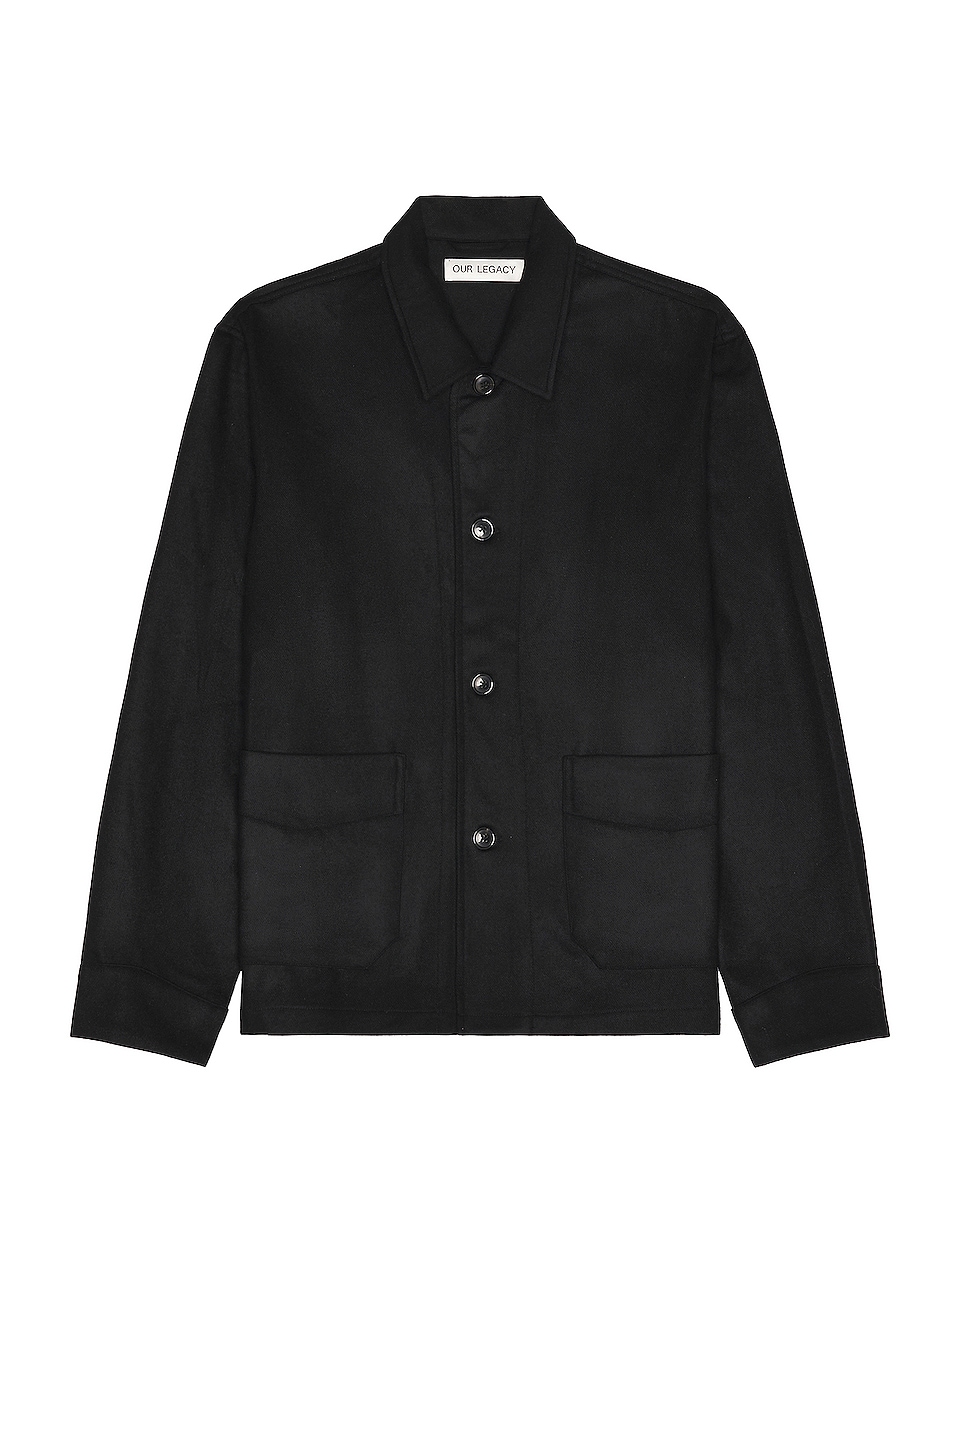 Our Legacy Archive Box Jacket in Black | REVOLVE